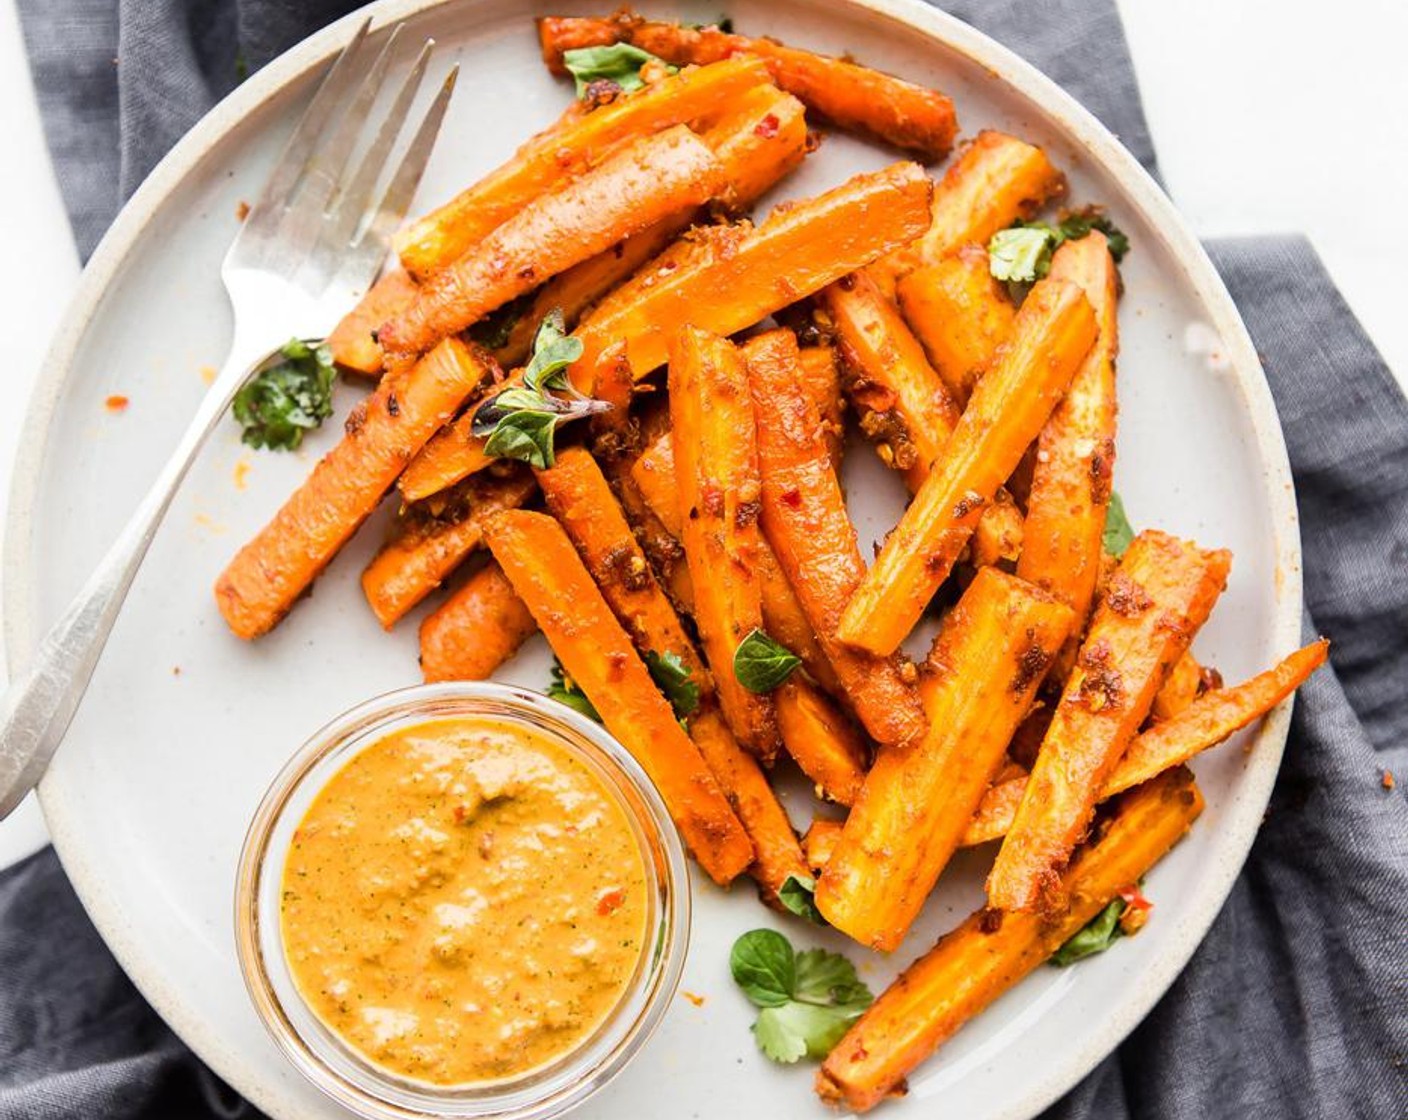 step 11 Remove from oven. Let them cool slightly or serve hot with the extra peri peri sauce or even a mayo/aioli of choice. Garnish carrot fries with extra Fresh Cilantro (to taste) and red pepper flakes if desired.